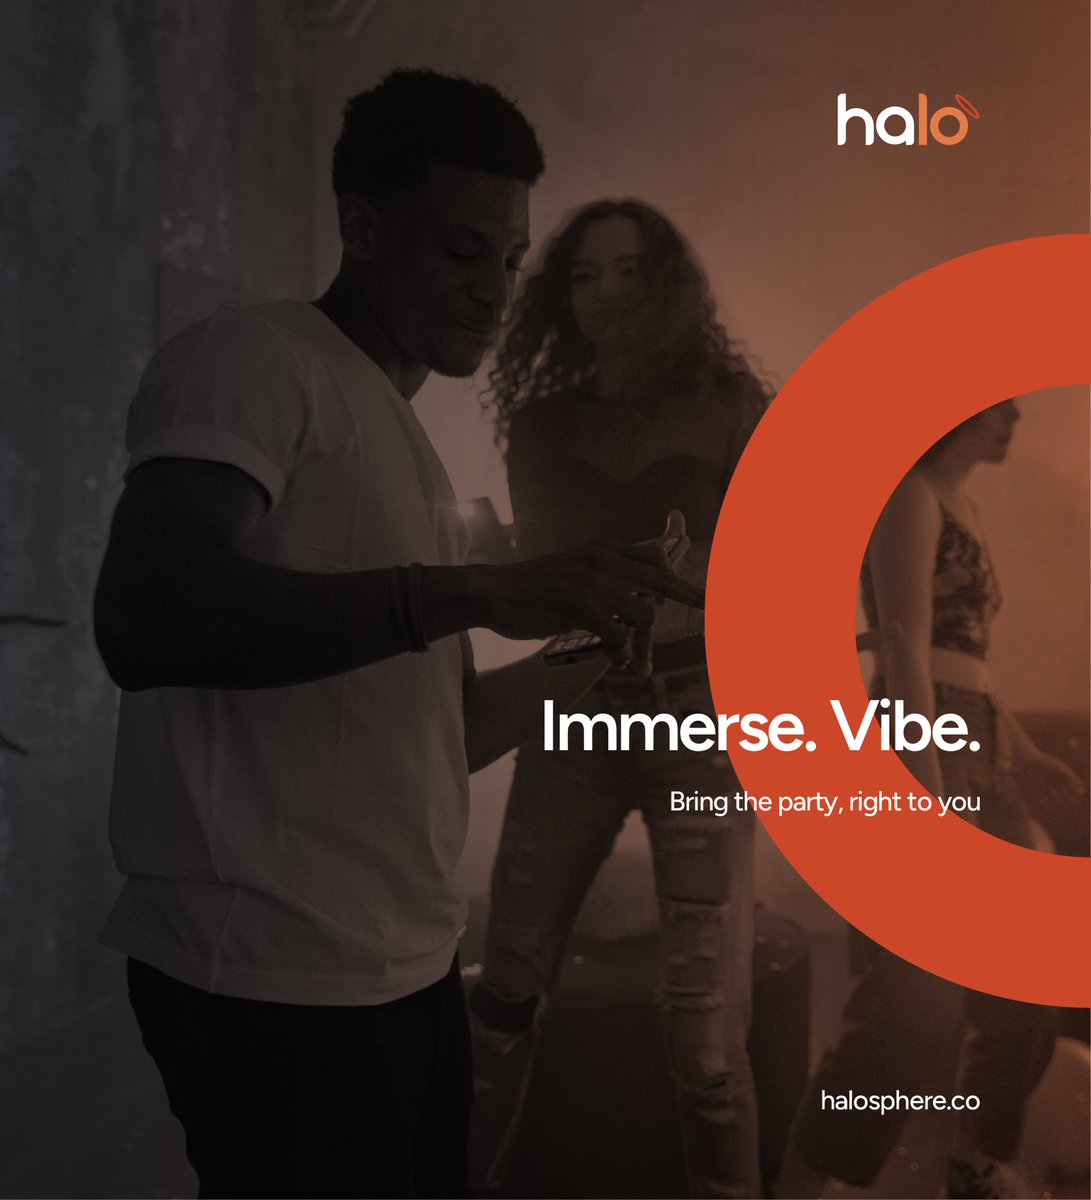 Bring the party, right where you are! Connect, vibe, play & immerse yourself in an entirely new layer of virtual experiences, like never before.

#halo #haloxp #emergingtechnology #experience #music #product #comingsoon #live #stream #livestream #app #liveevents